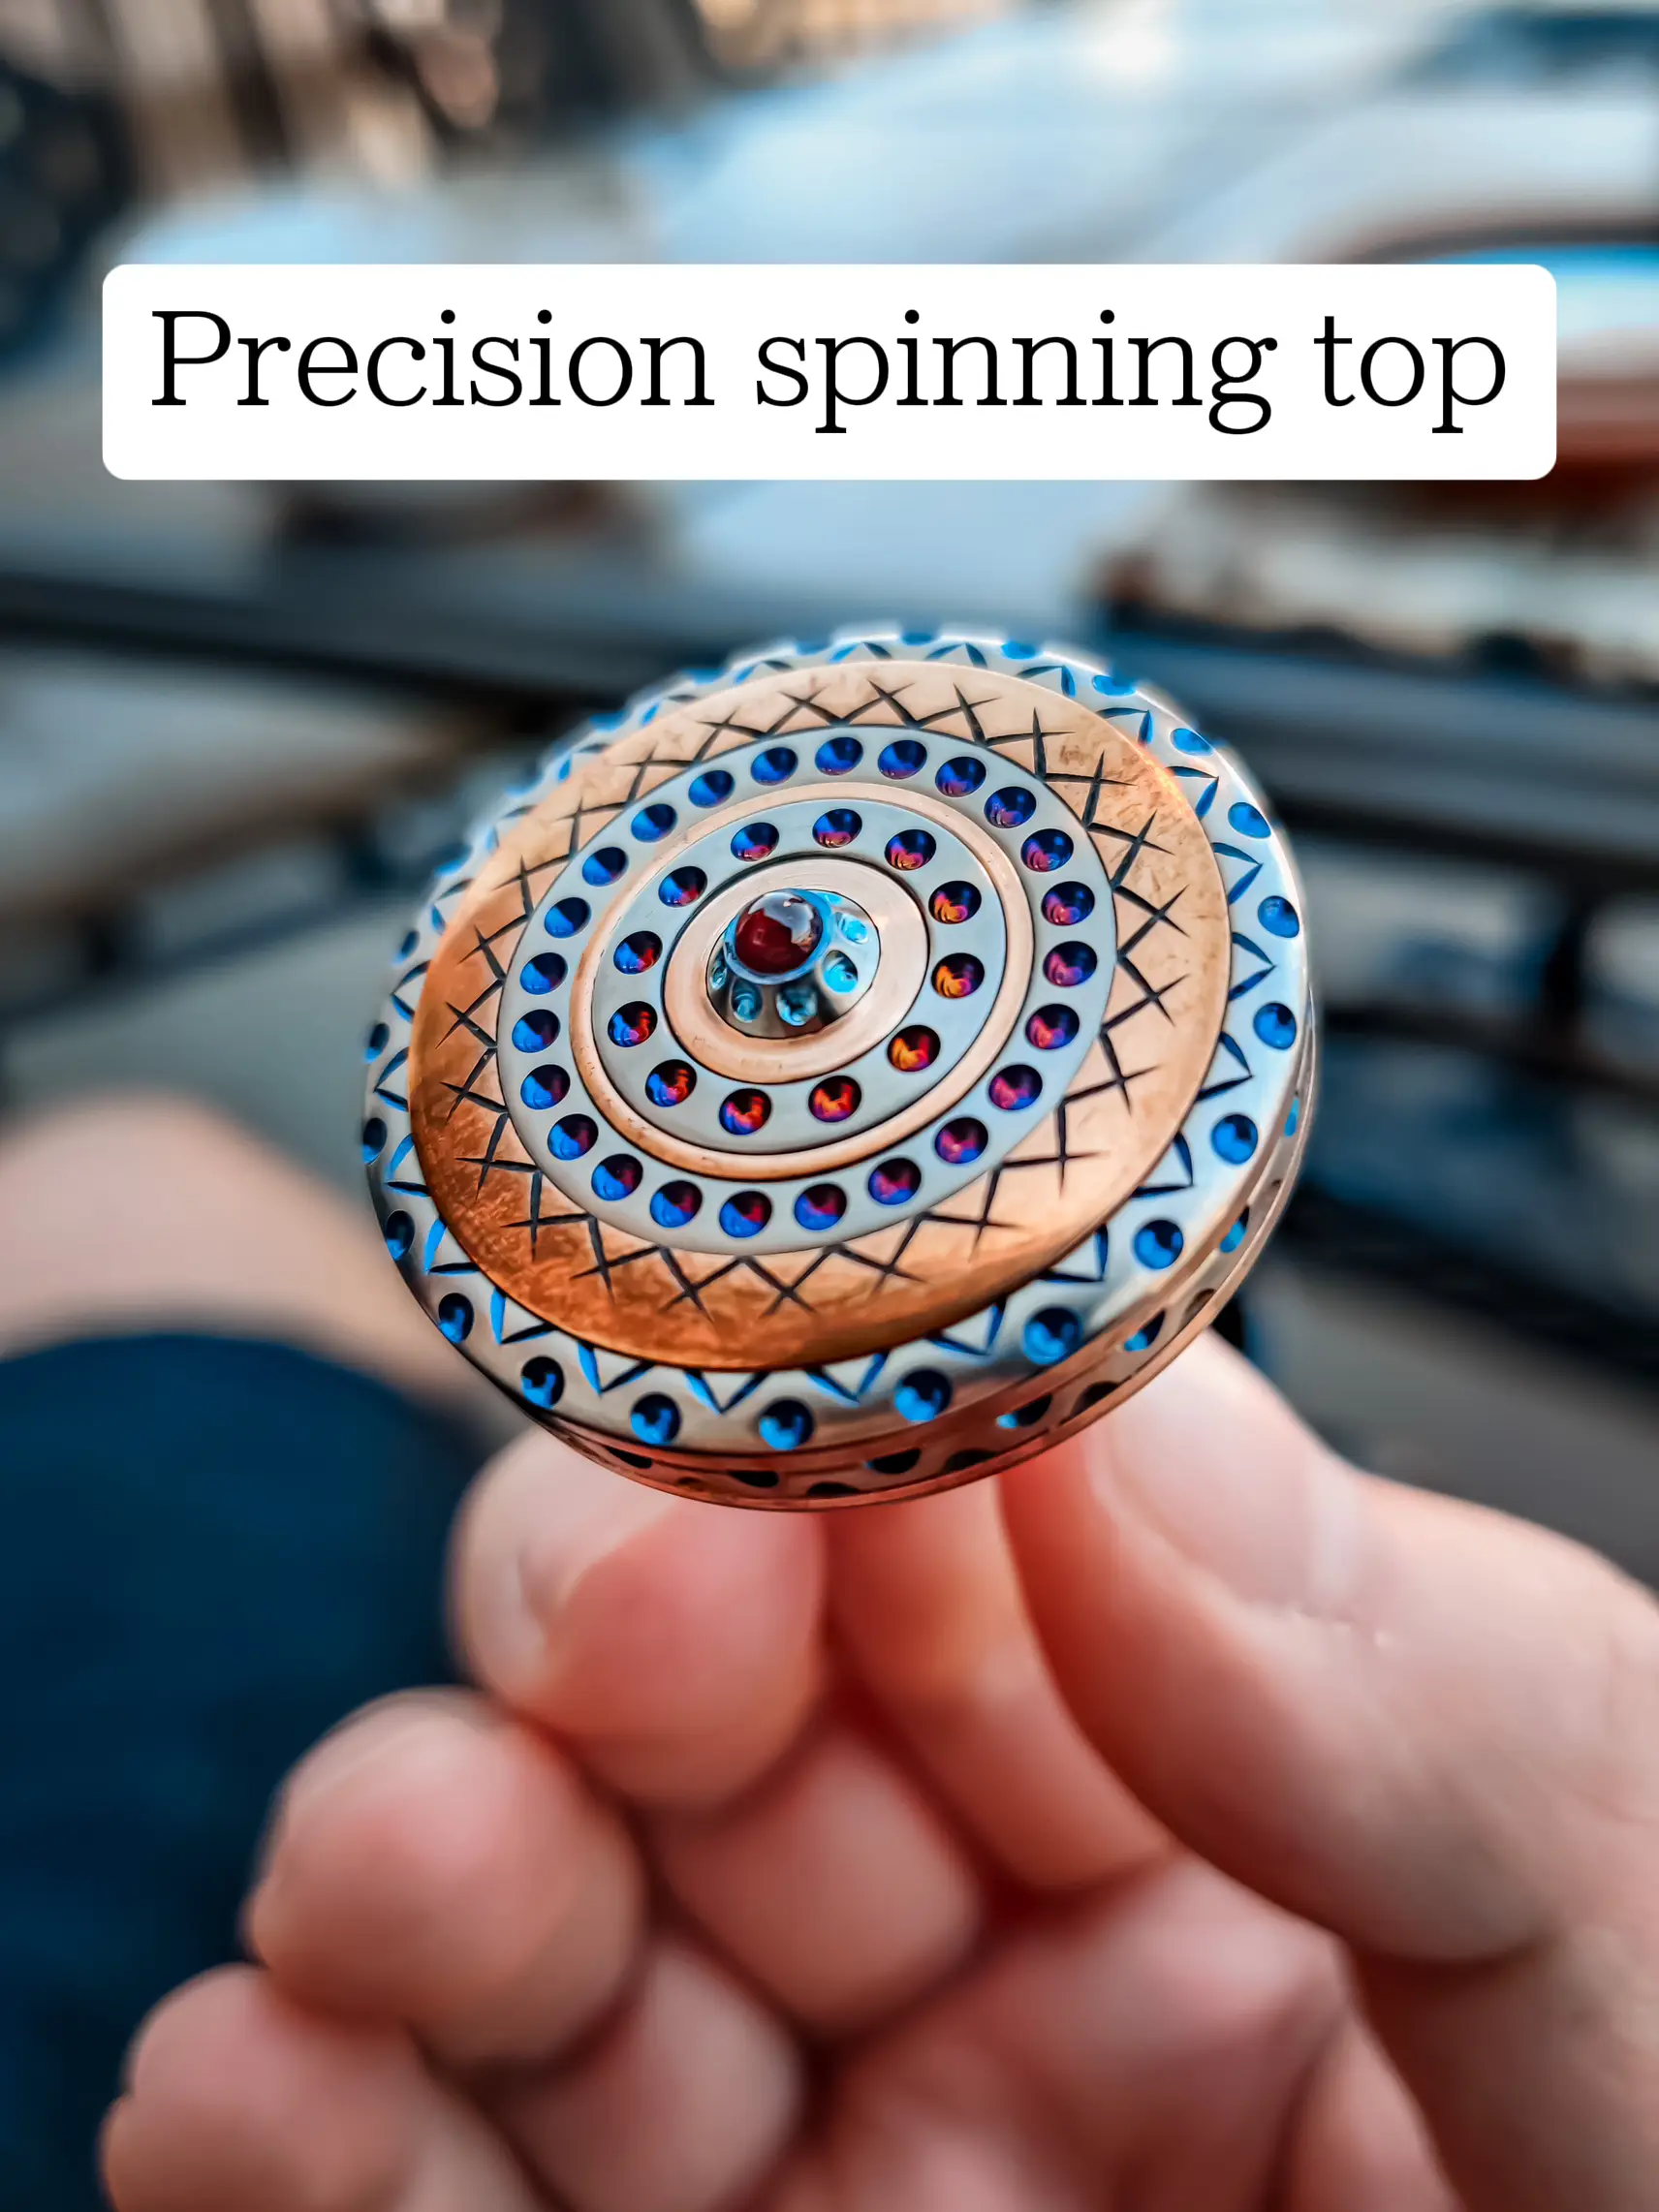 Precision spinning top, Gallery posted by SpinningTopTom